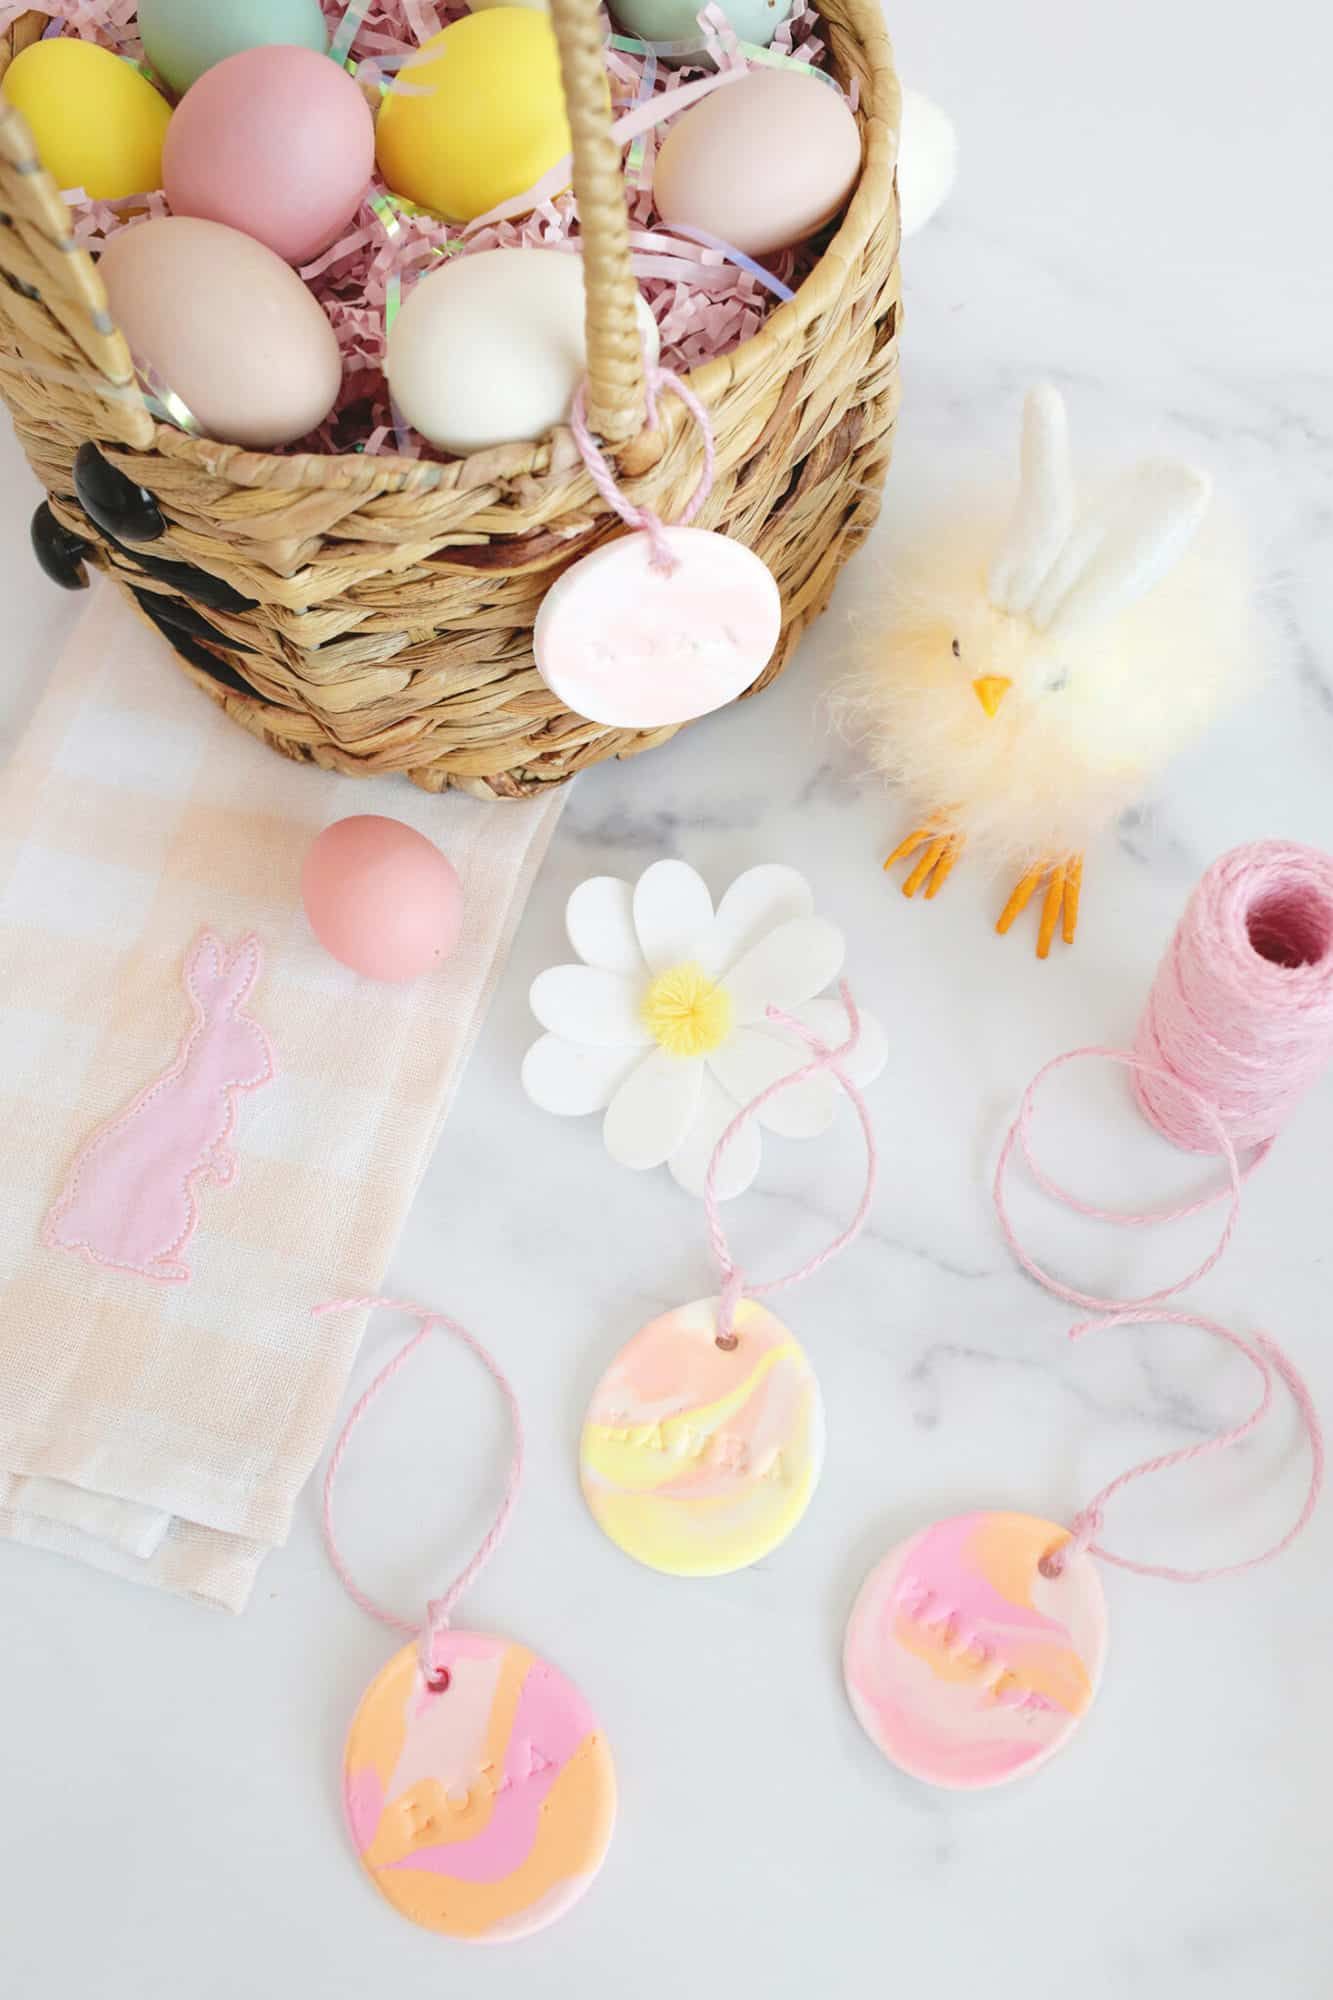 20 Creative & Fun Easter Crafts For Kids